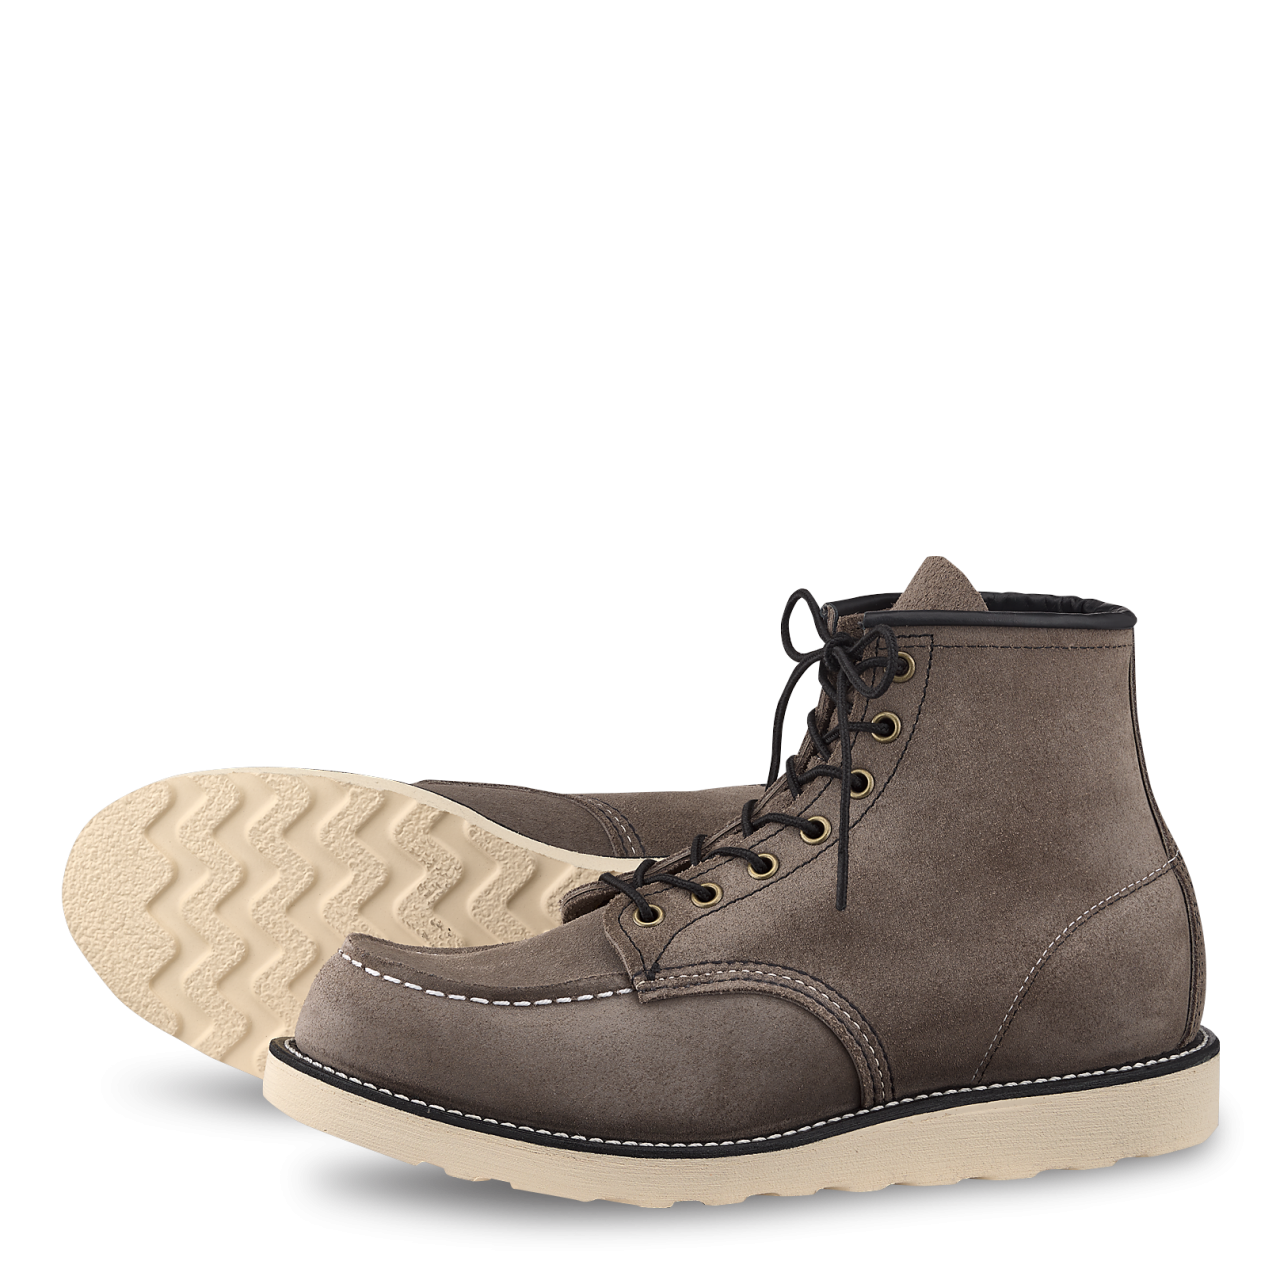 Red Wing 8863 Moc Toe